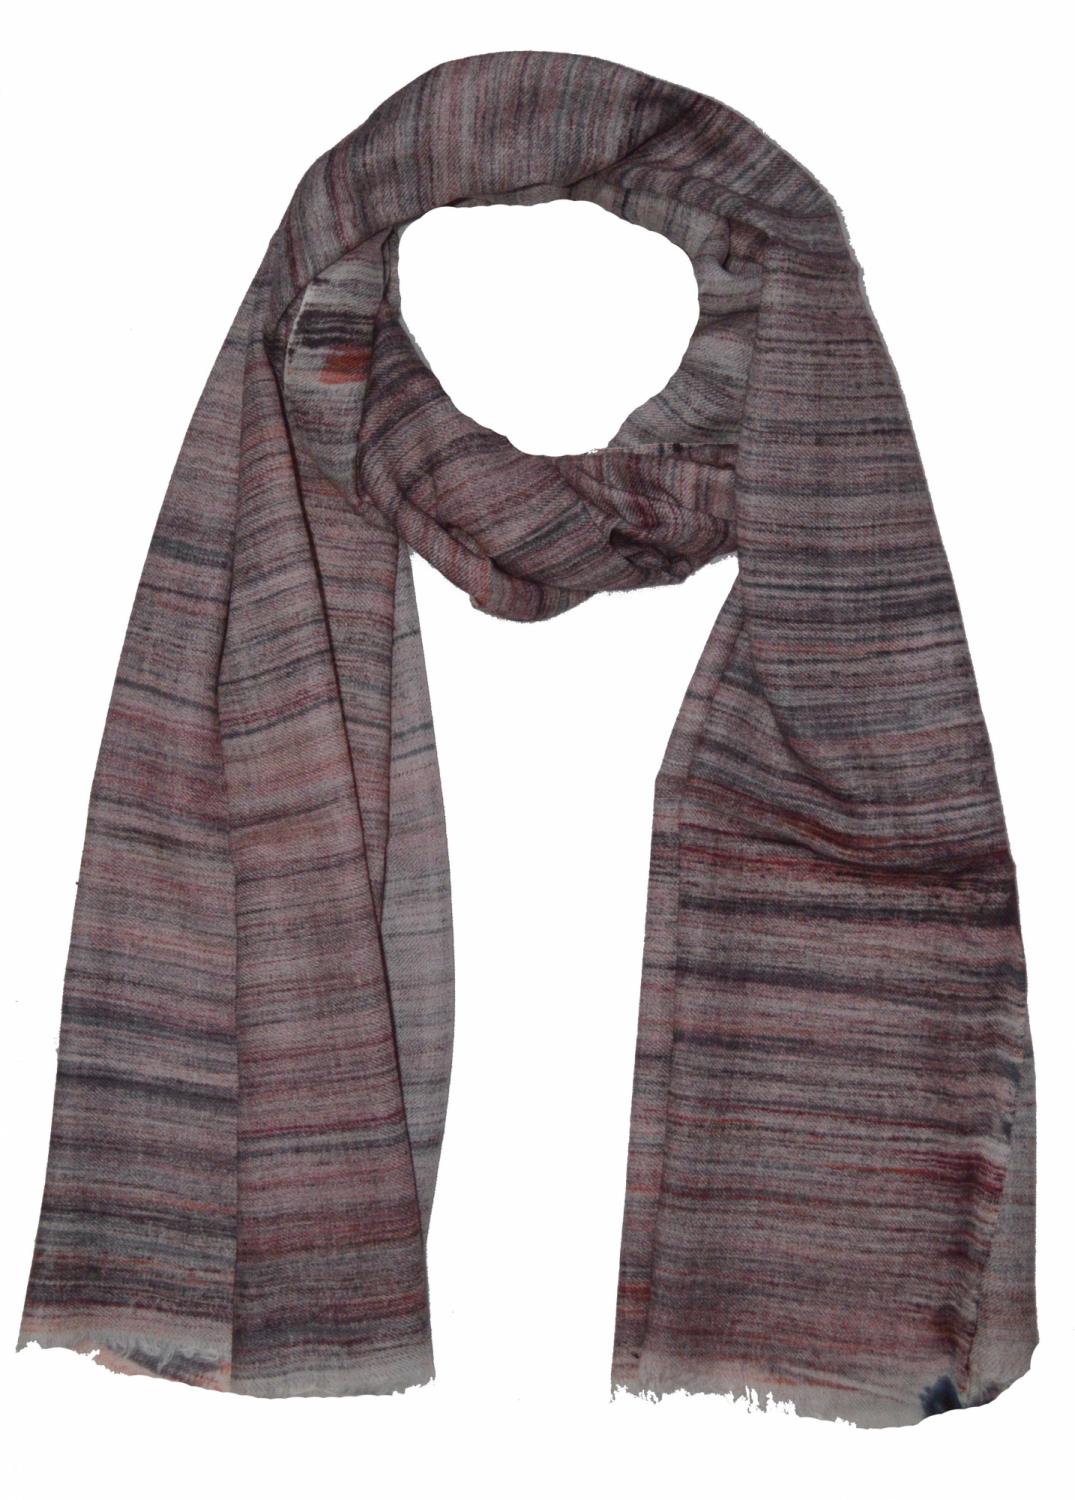 Cotton scarf for women with decorative ends Silk scarves for women's fashion,  Cashmere scarves for winter warmth, Designer scarves for special occasions,  Handwoven woolen scarves for men